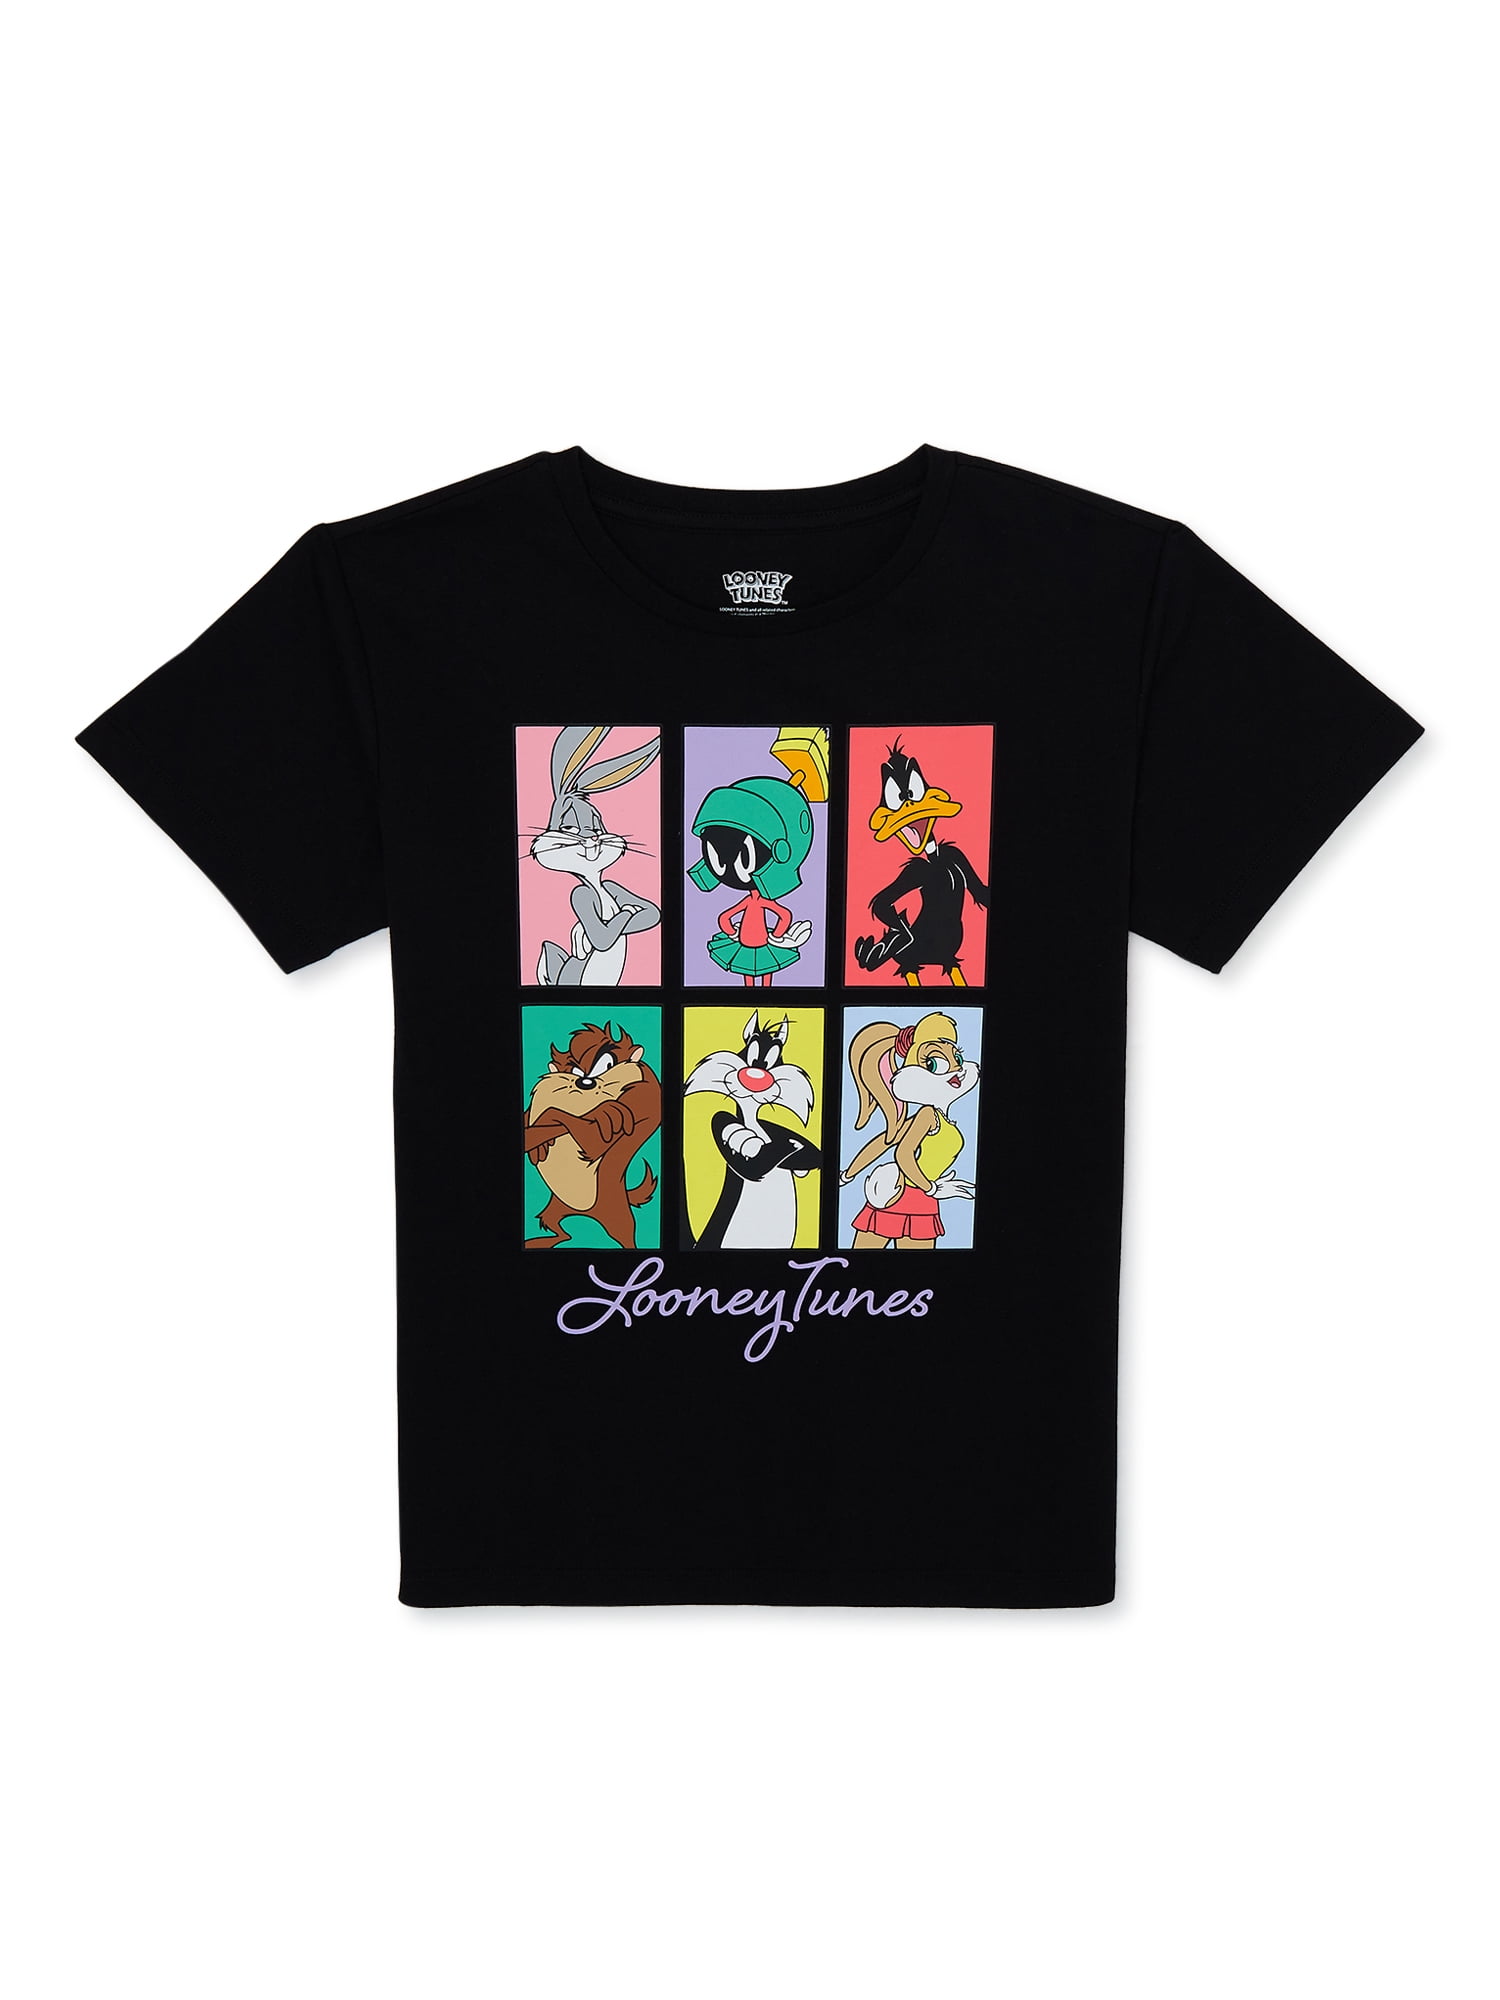 Warner Brothers Girls Looney Tunes Graphic T-Shirt, Sizes 4-18